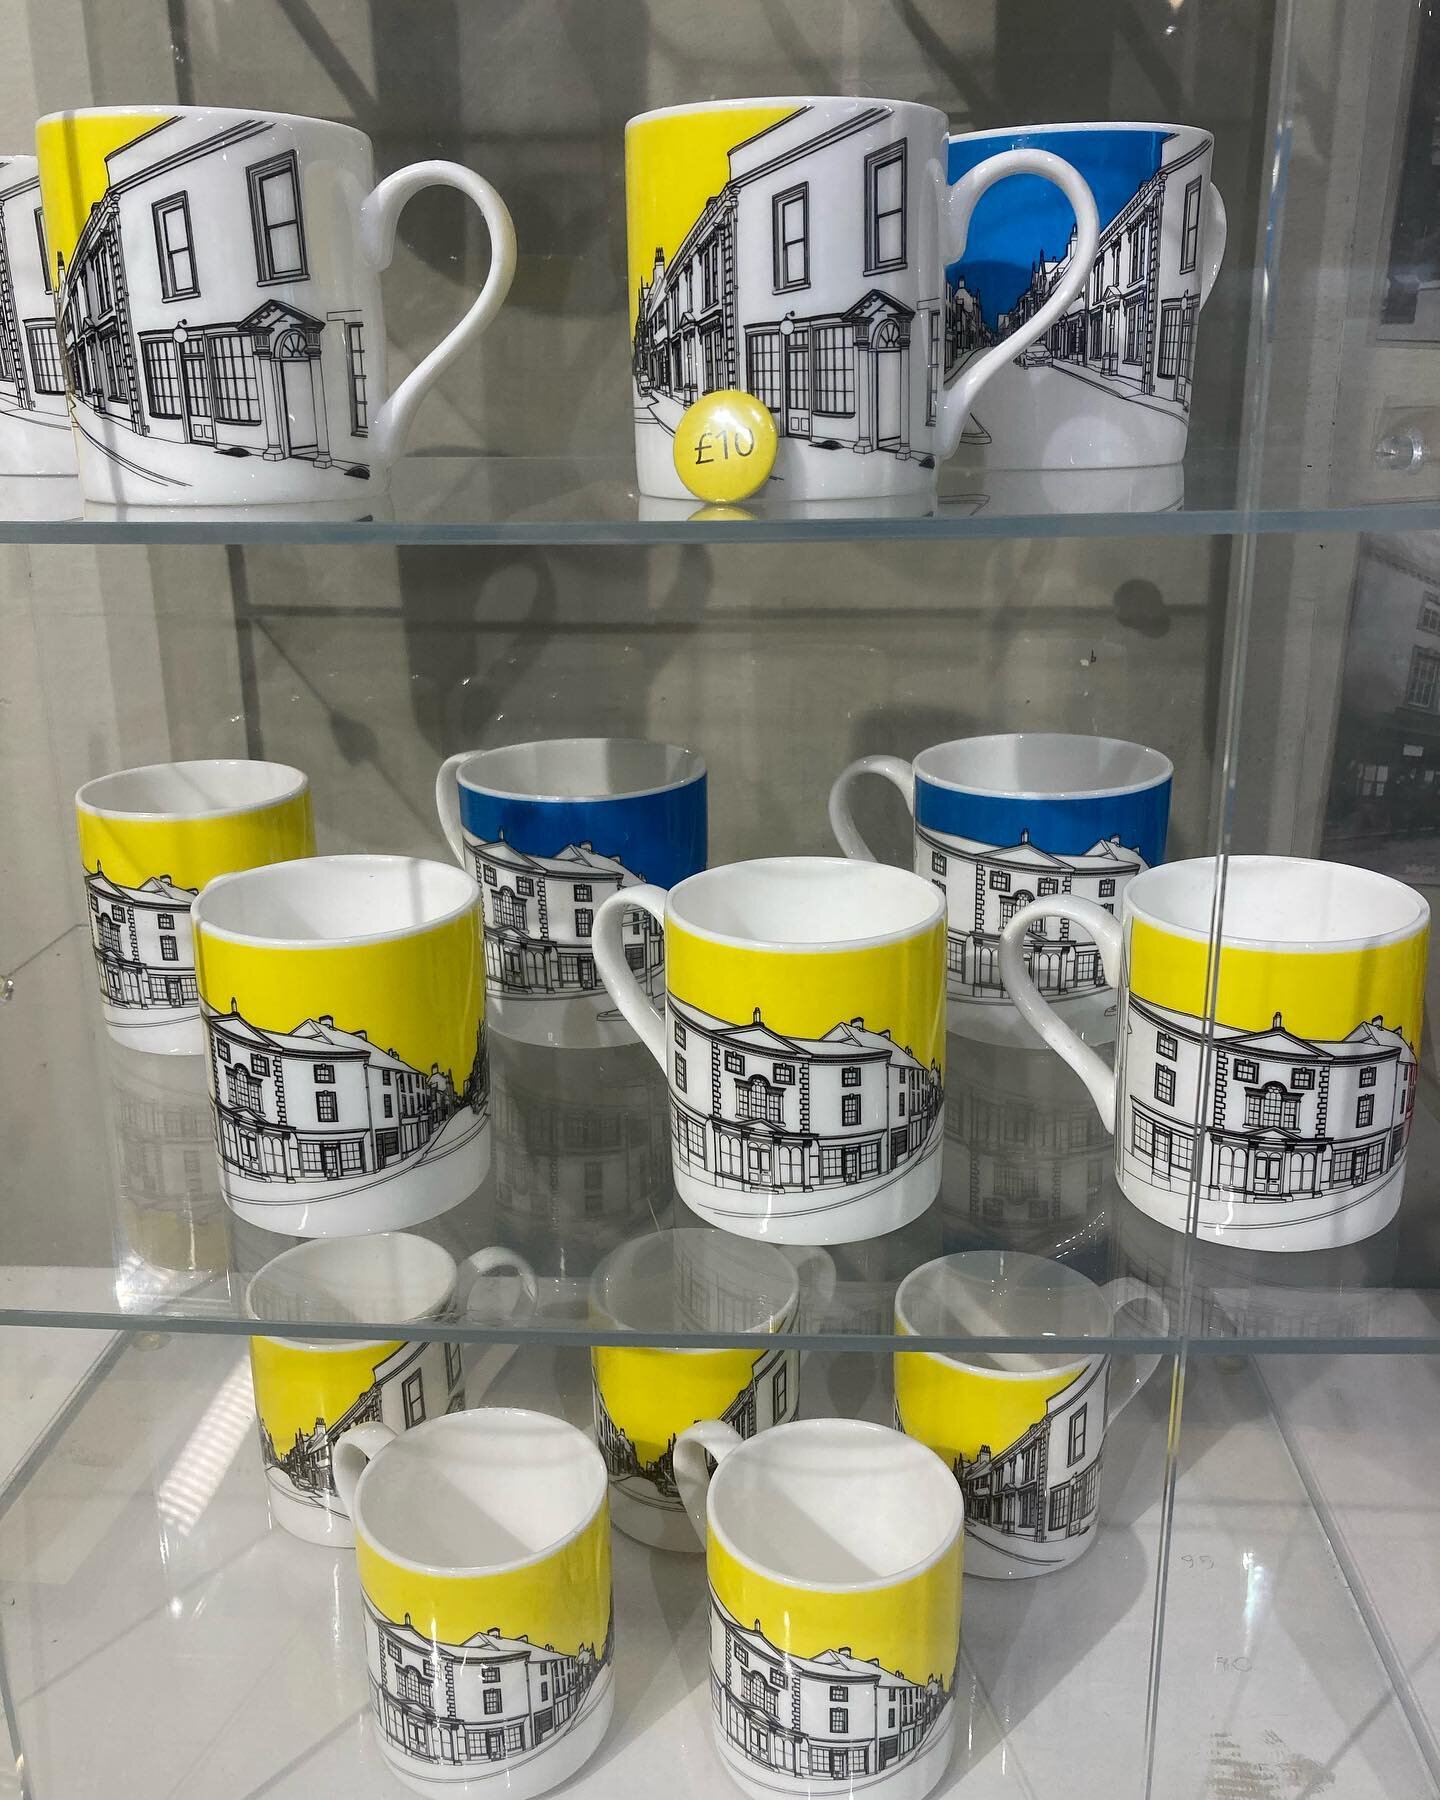 Bruton mugs now for sale in the museum. Kindly provided by @peoplewillalwaysneedplates #supportlocal #supportmuseums